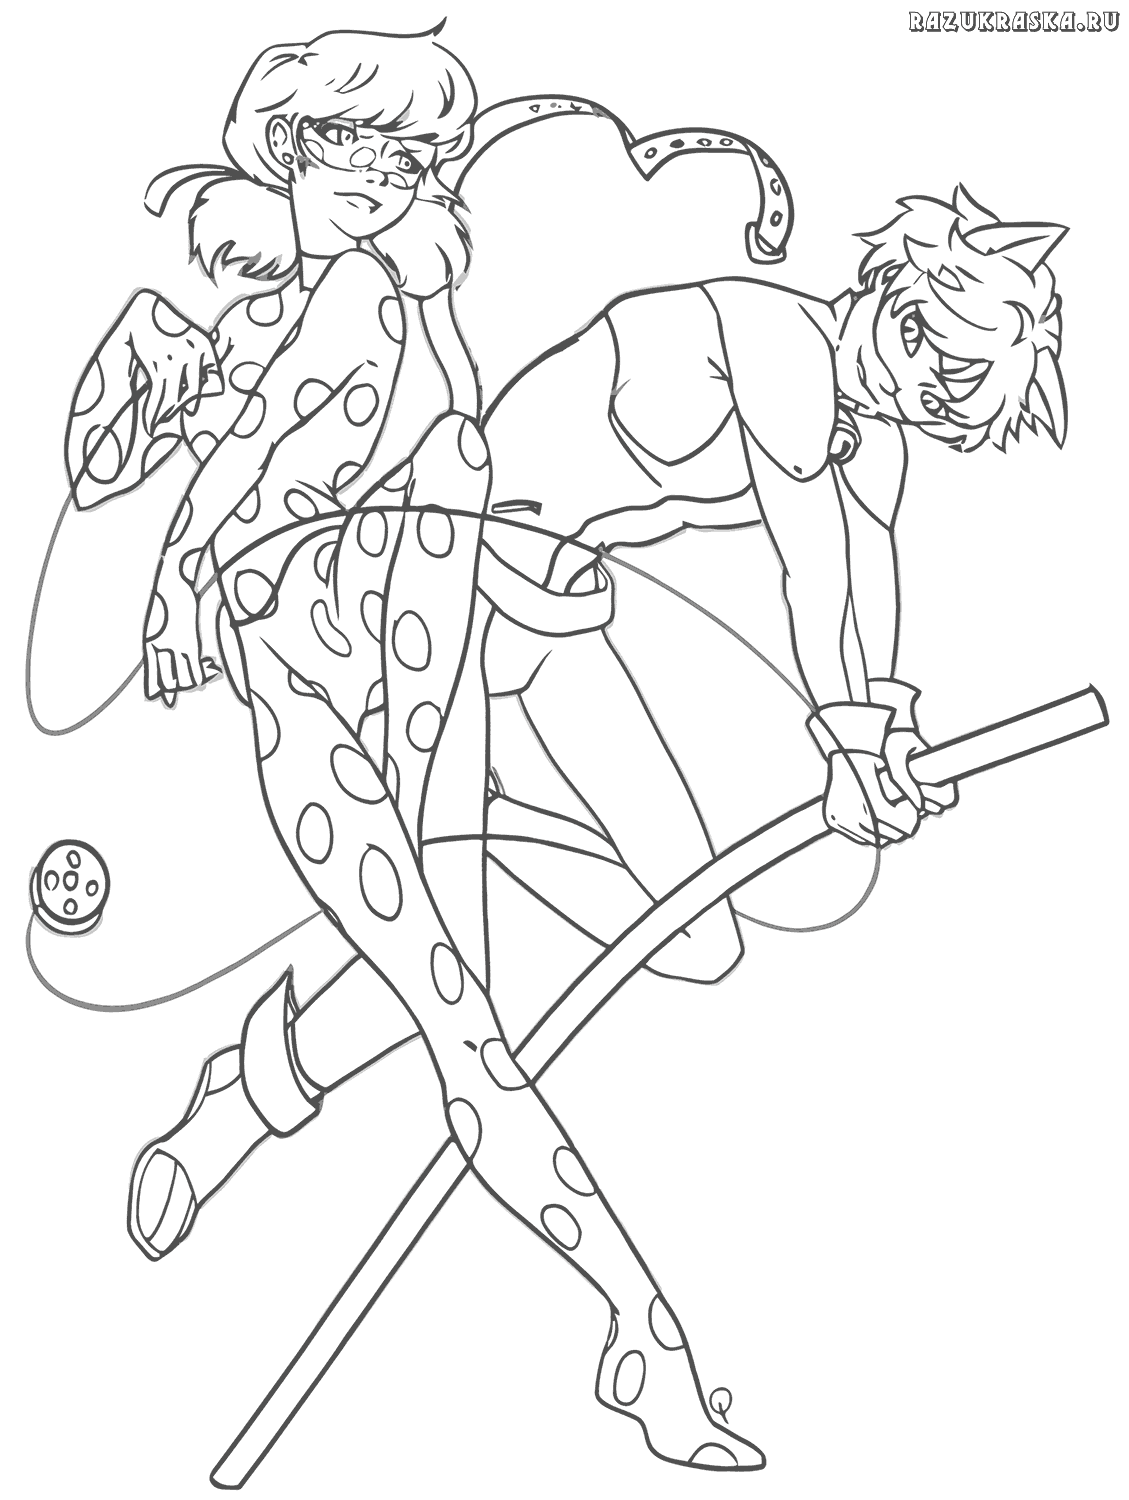 Ladybug & Cat Noir Coloring pages to print and color